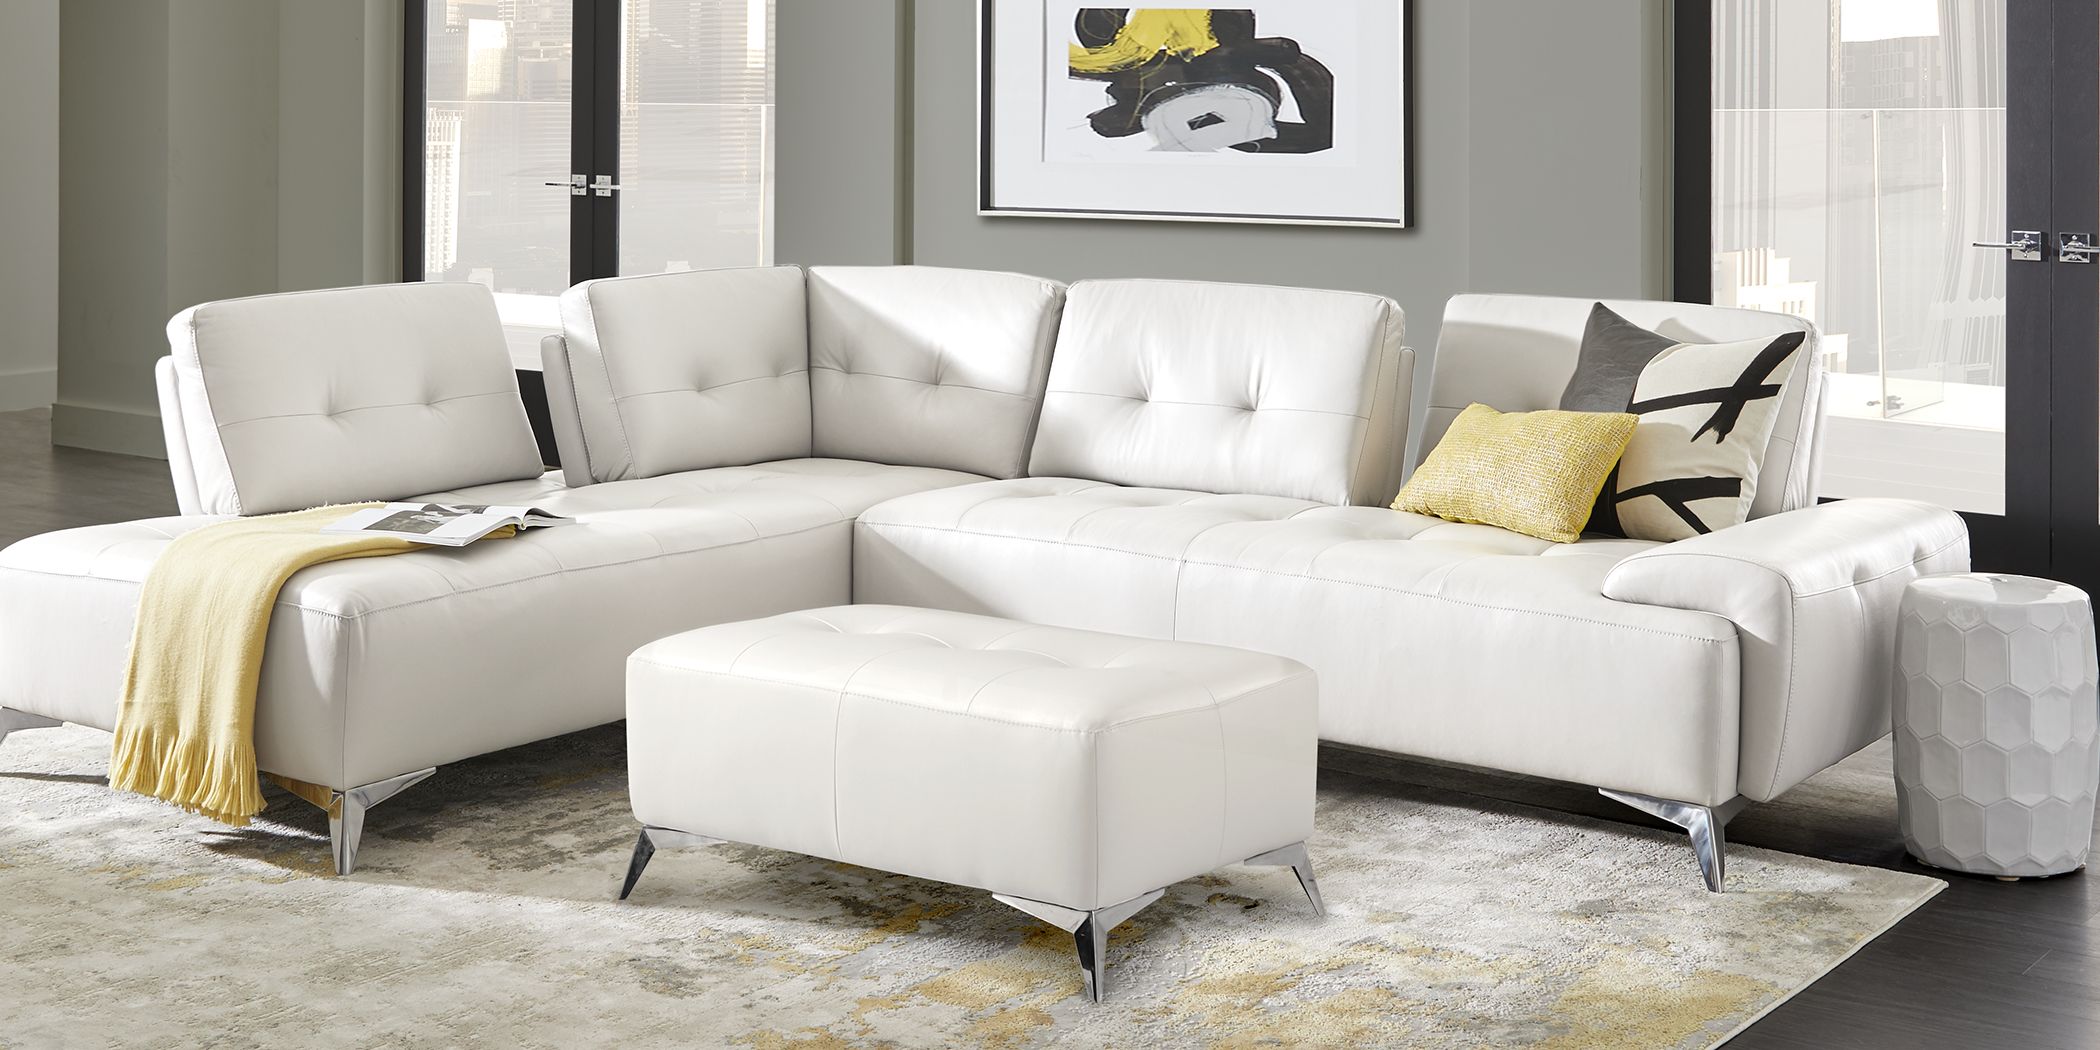 Leather Sectional Furniture Sets Sectional Leather Furniture